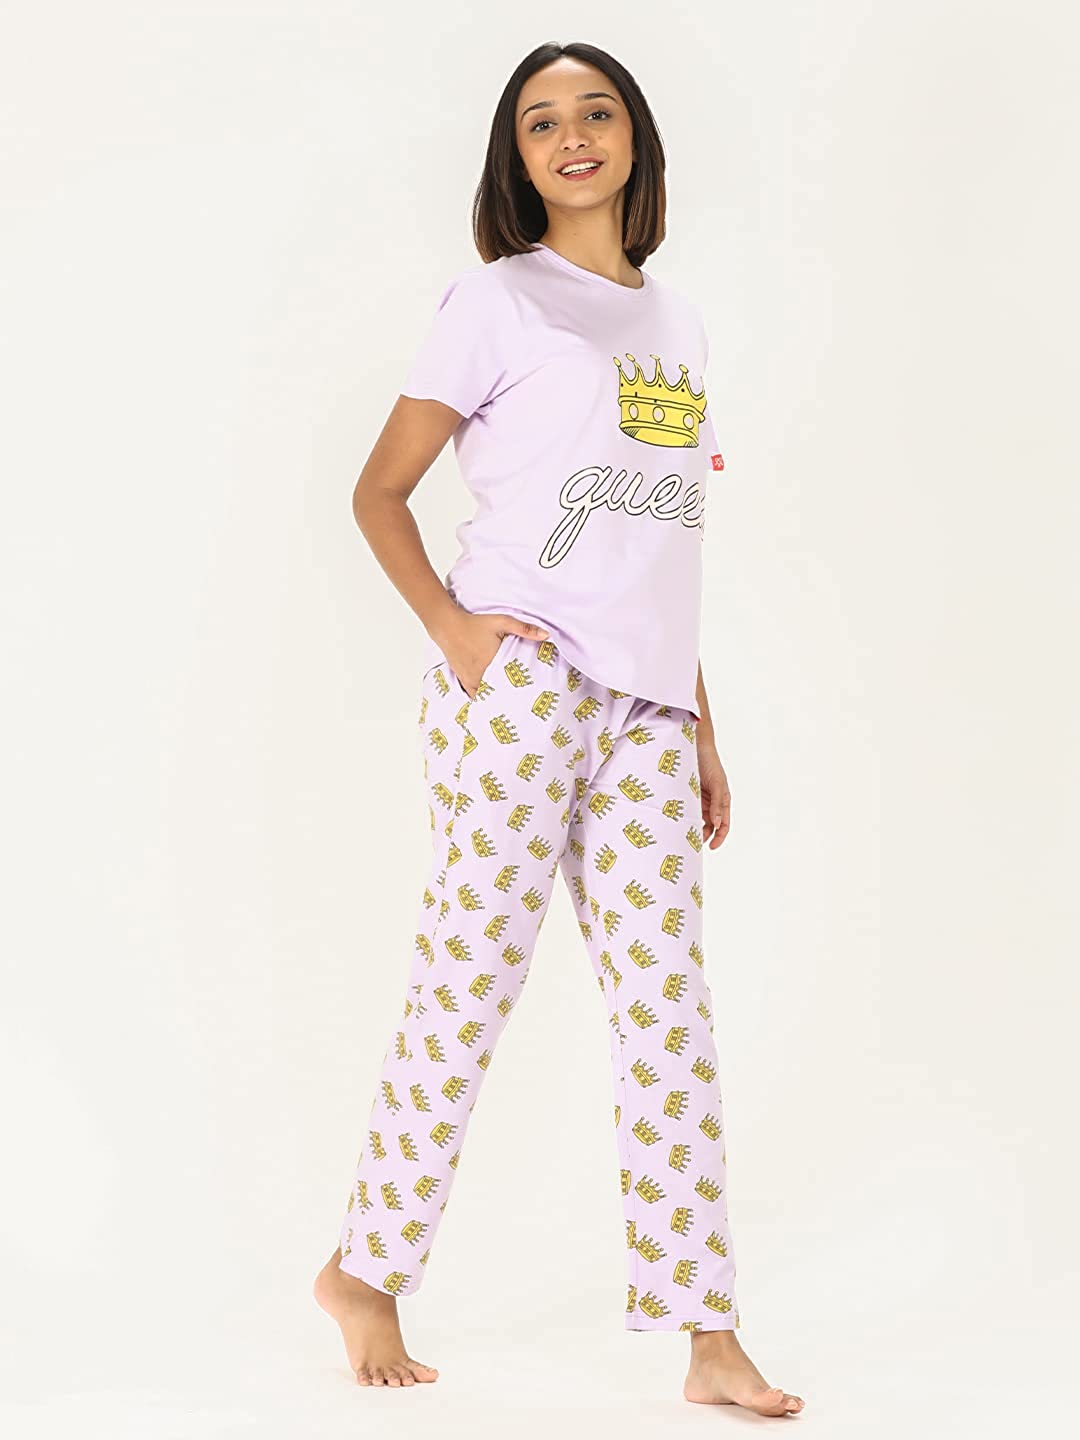 Evolove Women's Pyjama Set Cotton | T-Shirt Pyjama Set for Women Night Wear for Daily Use with Pockets & Pants Super Soft Comfortable (S to 2XL Size)